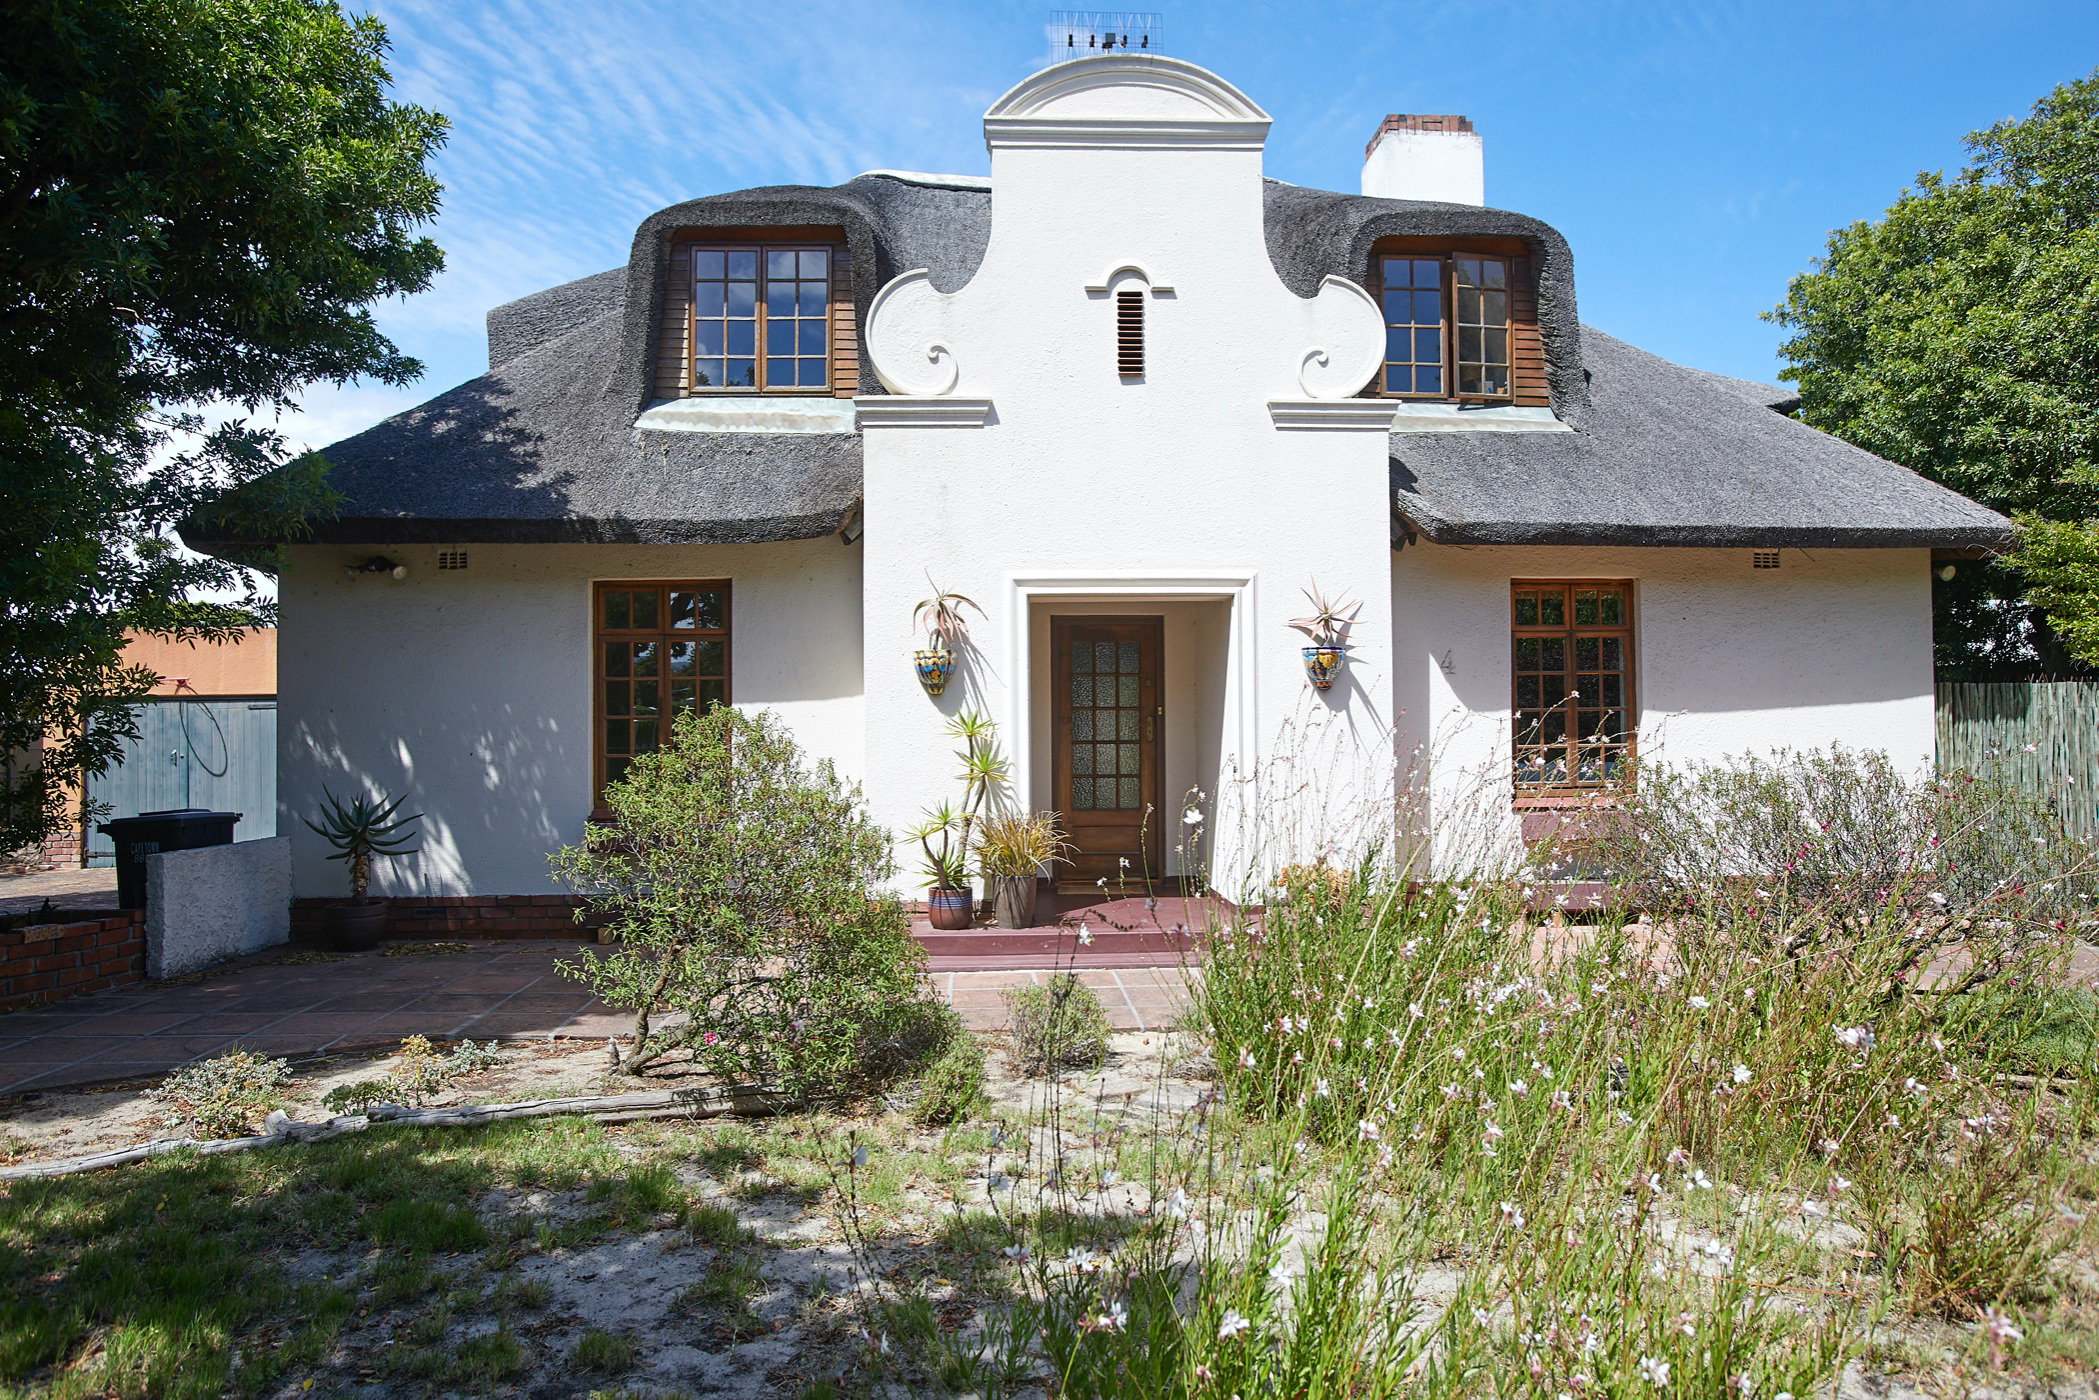 5 bedroom house for sale in Pinelands (Cape Town)